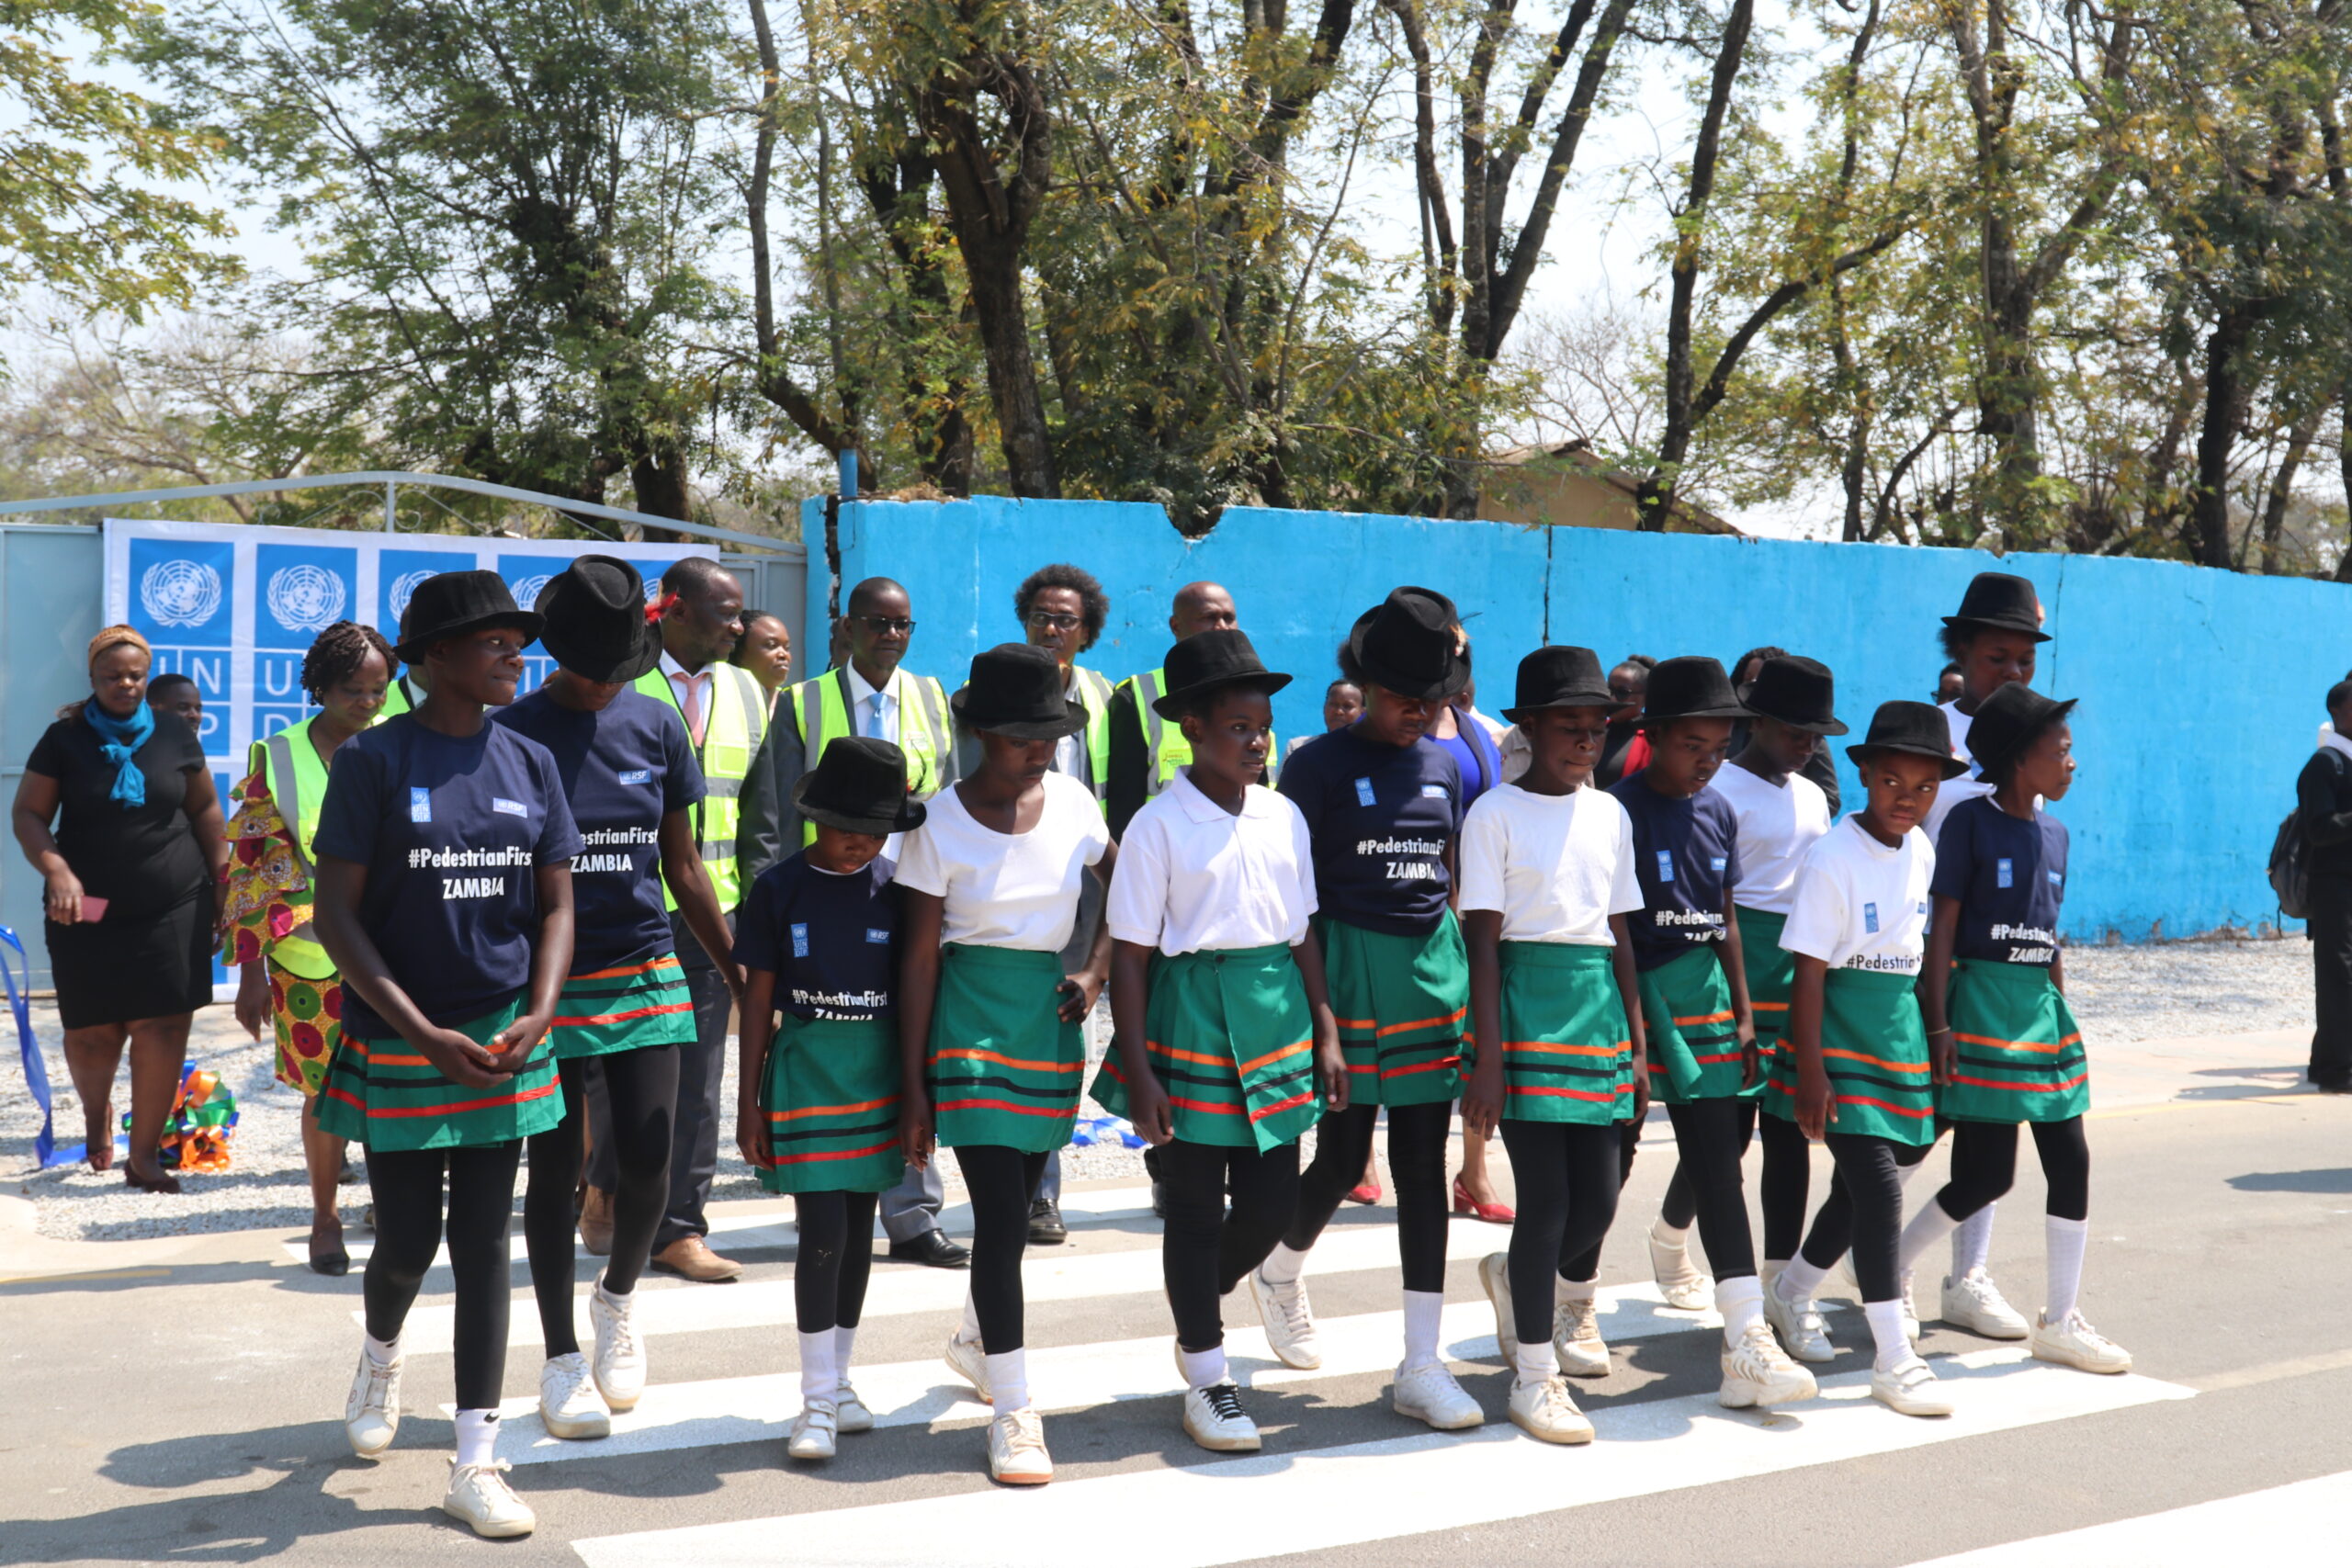 Students of Jacaranda Combined School crossing their newly painted pedestrian crossing